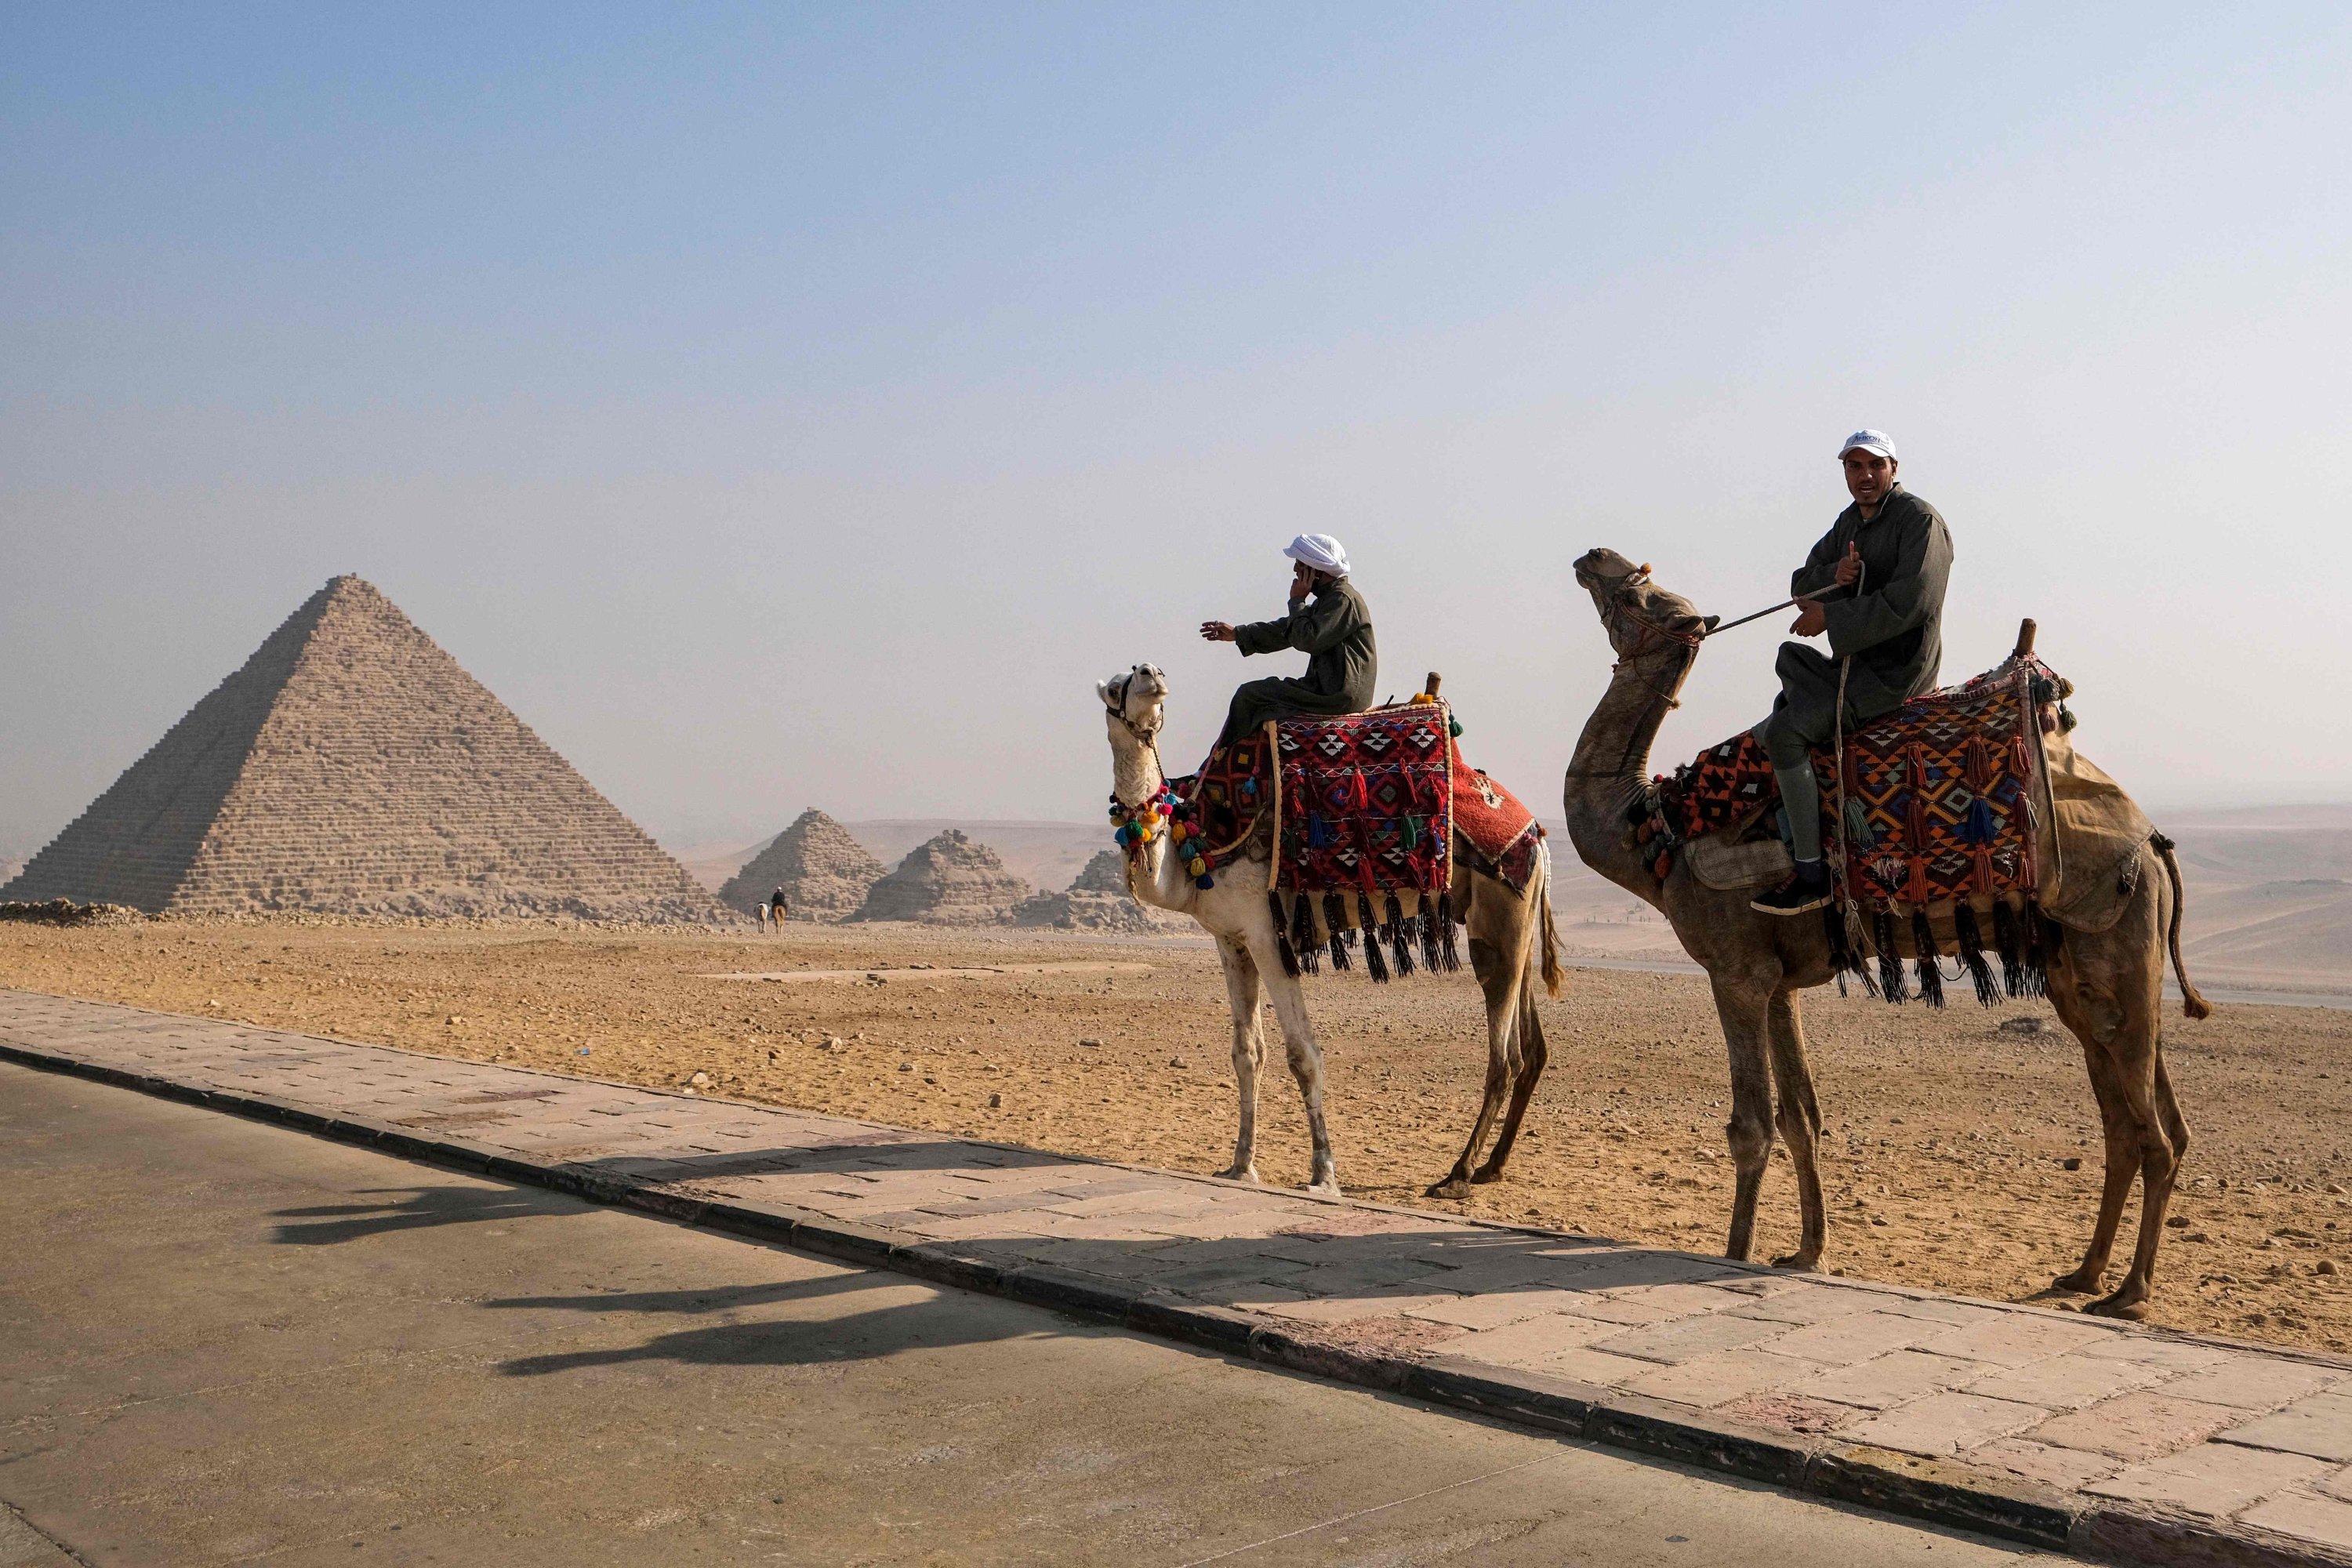 Camel trainers ride camels awaiting tourists by the Pyramid of Menkaure (Menkheres) at the Giza Pyramids Necropolis on the western outskirts of the capital